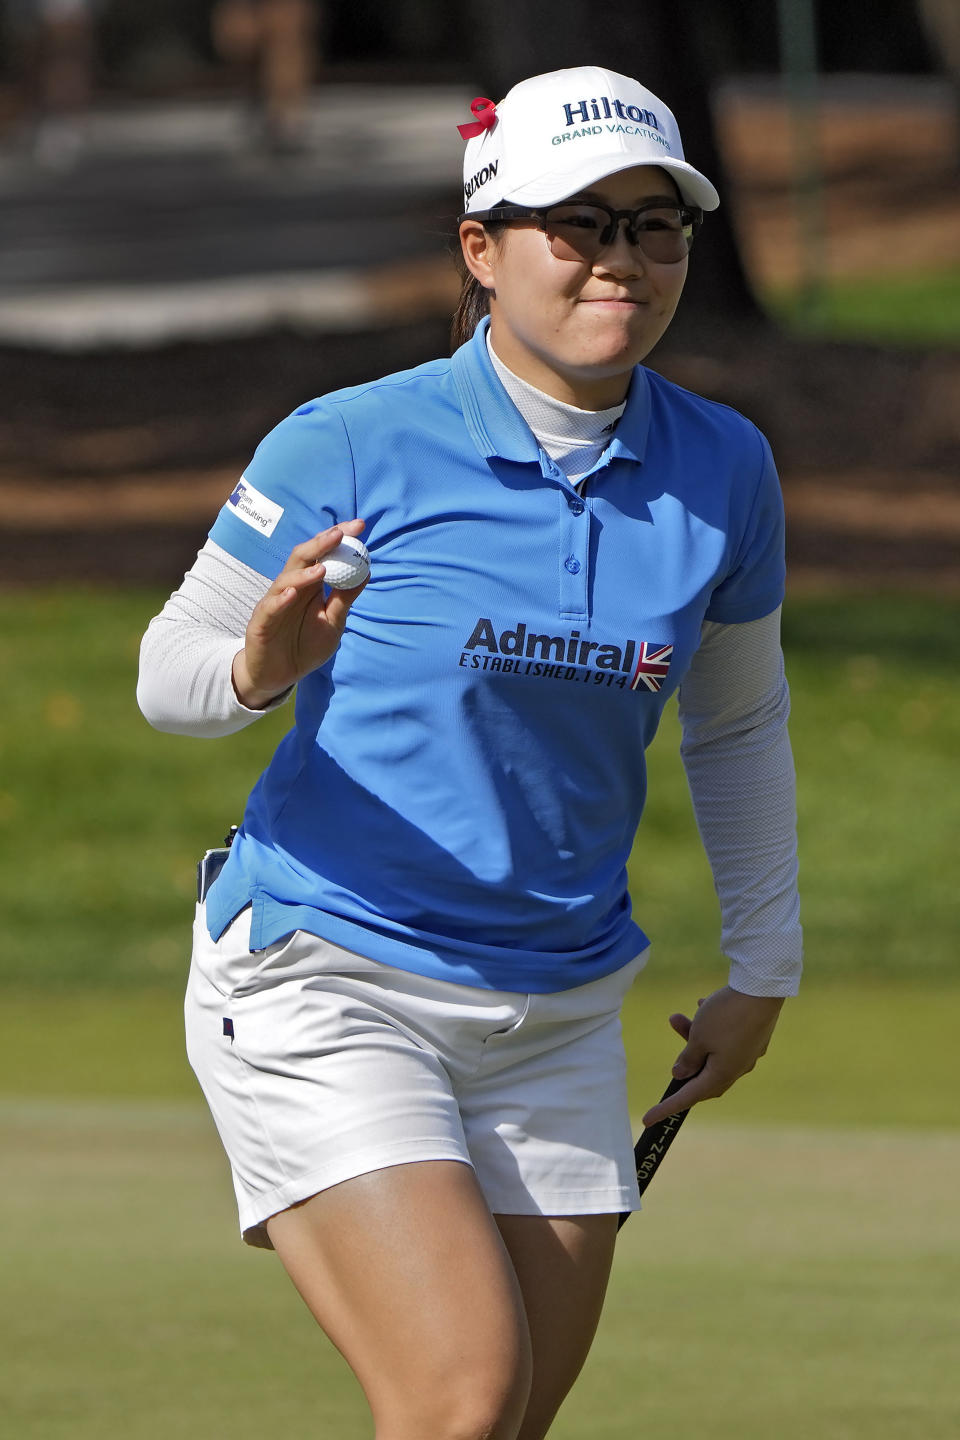 Nasa Hataoka, of Japan, holds up her golf ball after making a birdie putt on the 10th hole during the first round of the Hilton Grand Vacations Tournament of Champions LPGA golf tournament Thursday, Jan. 19, 2023, in Orlando, Fla. (AP Photo/John Raoux)